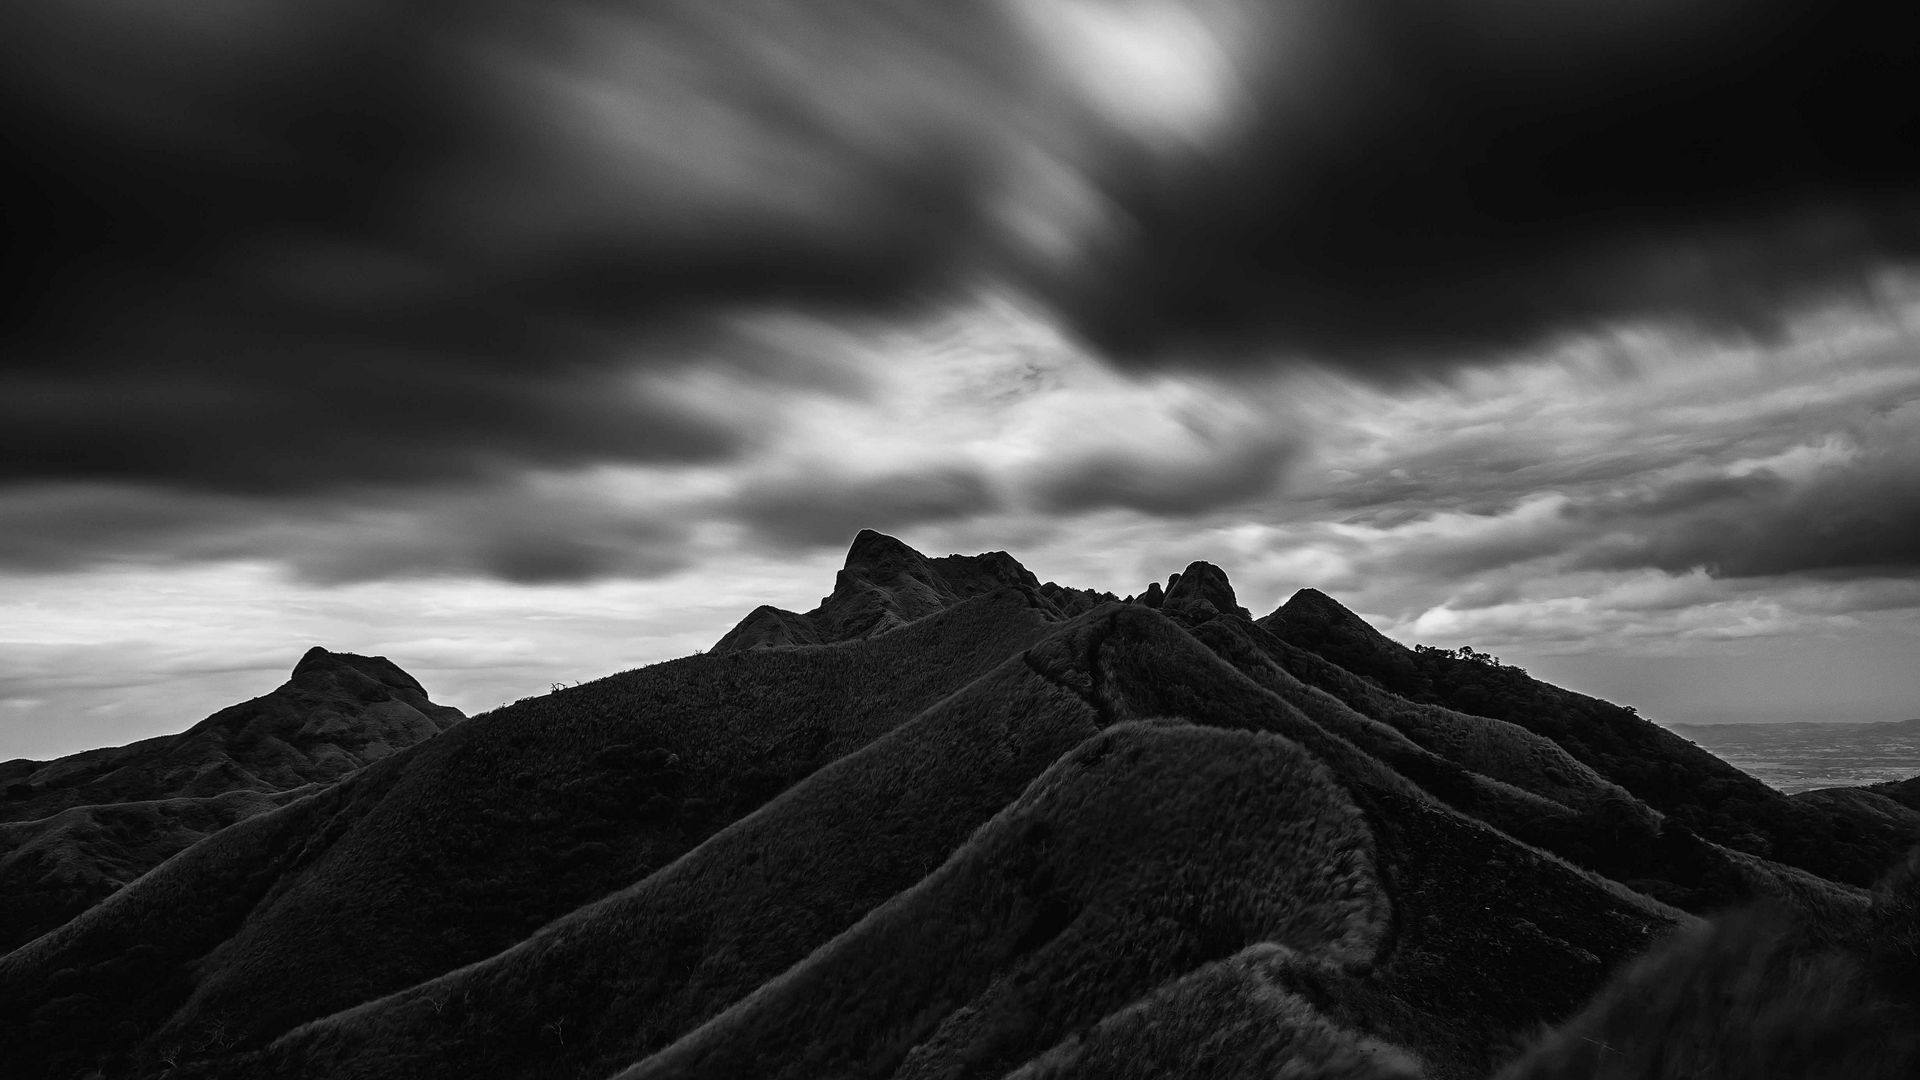 Download wallpaper 1920x1080 mountain, hill, bw, black, clouds, batangas, philippines full hd, hdtv, fhd, 1080p HD background